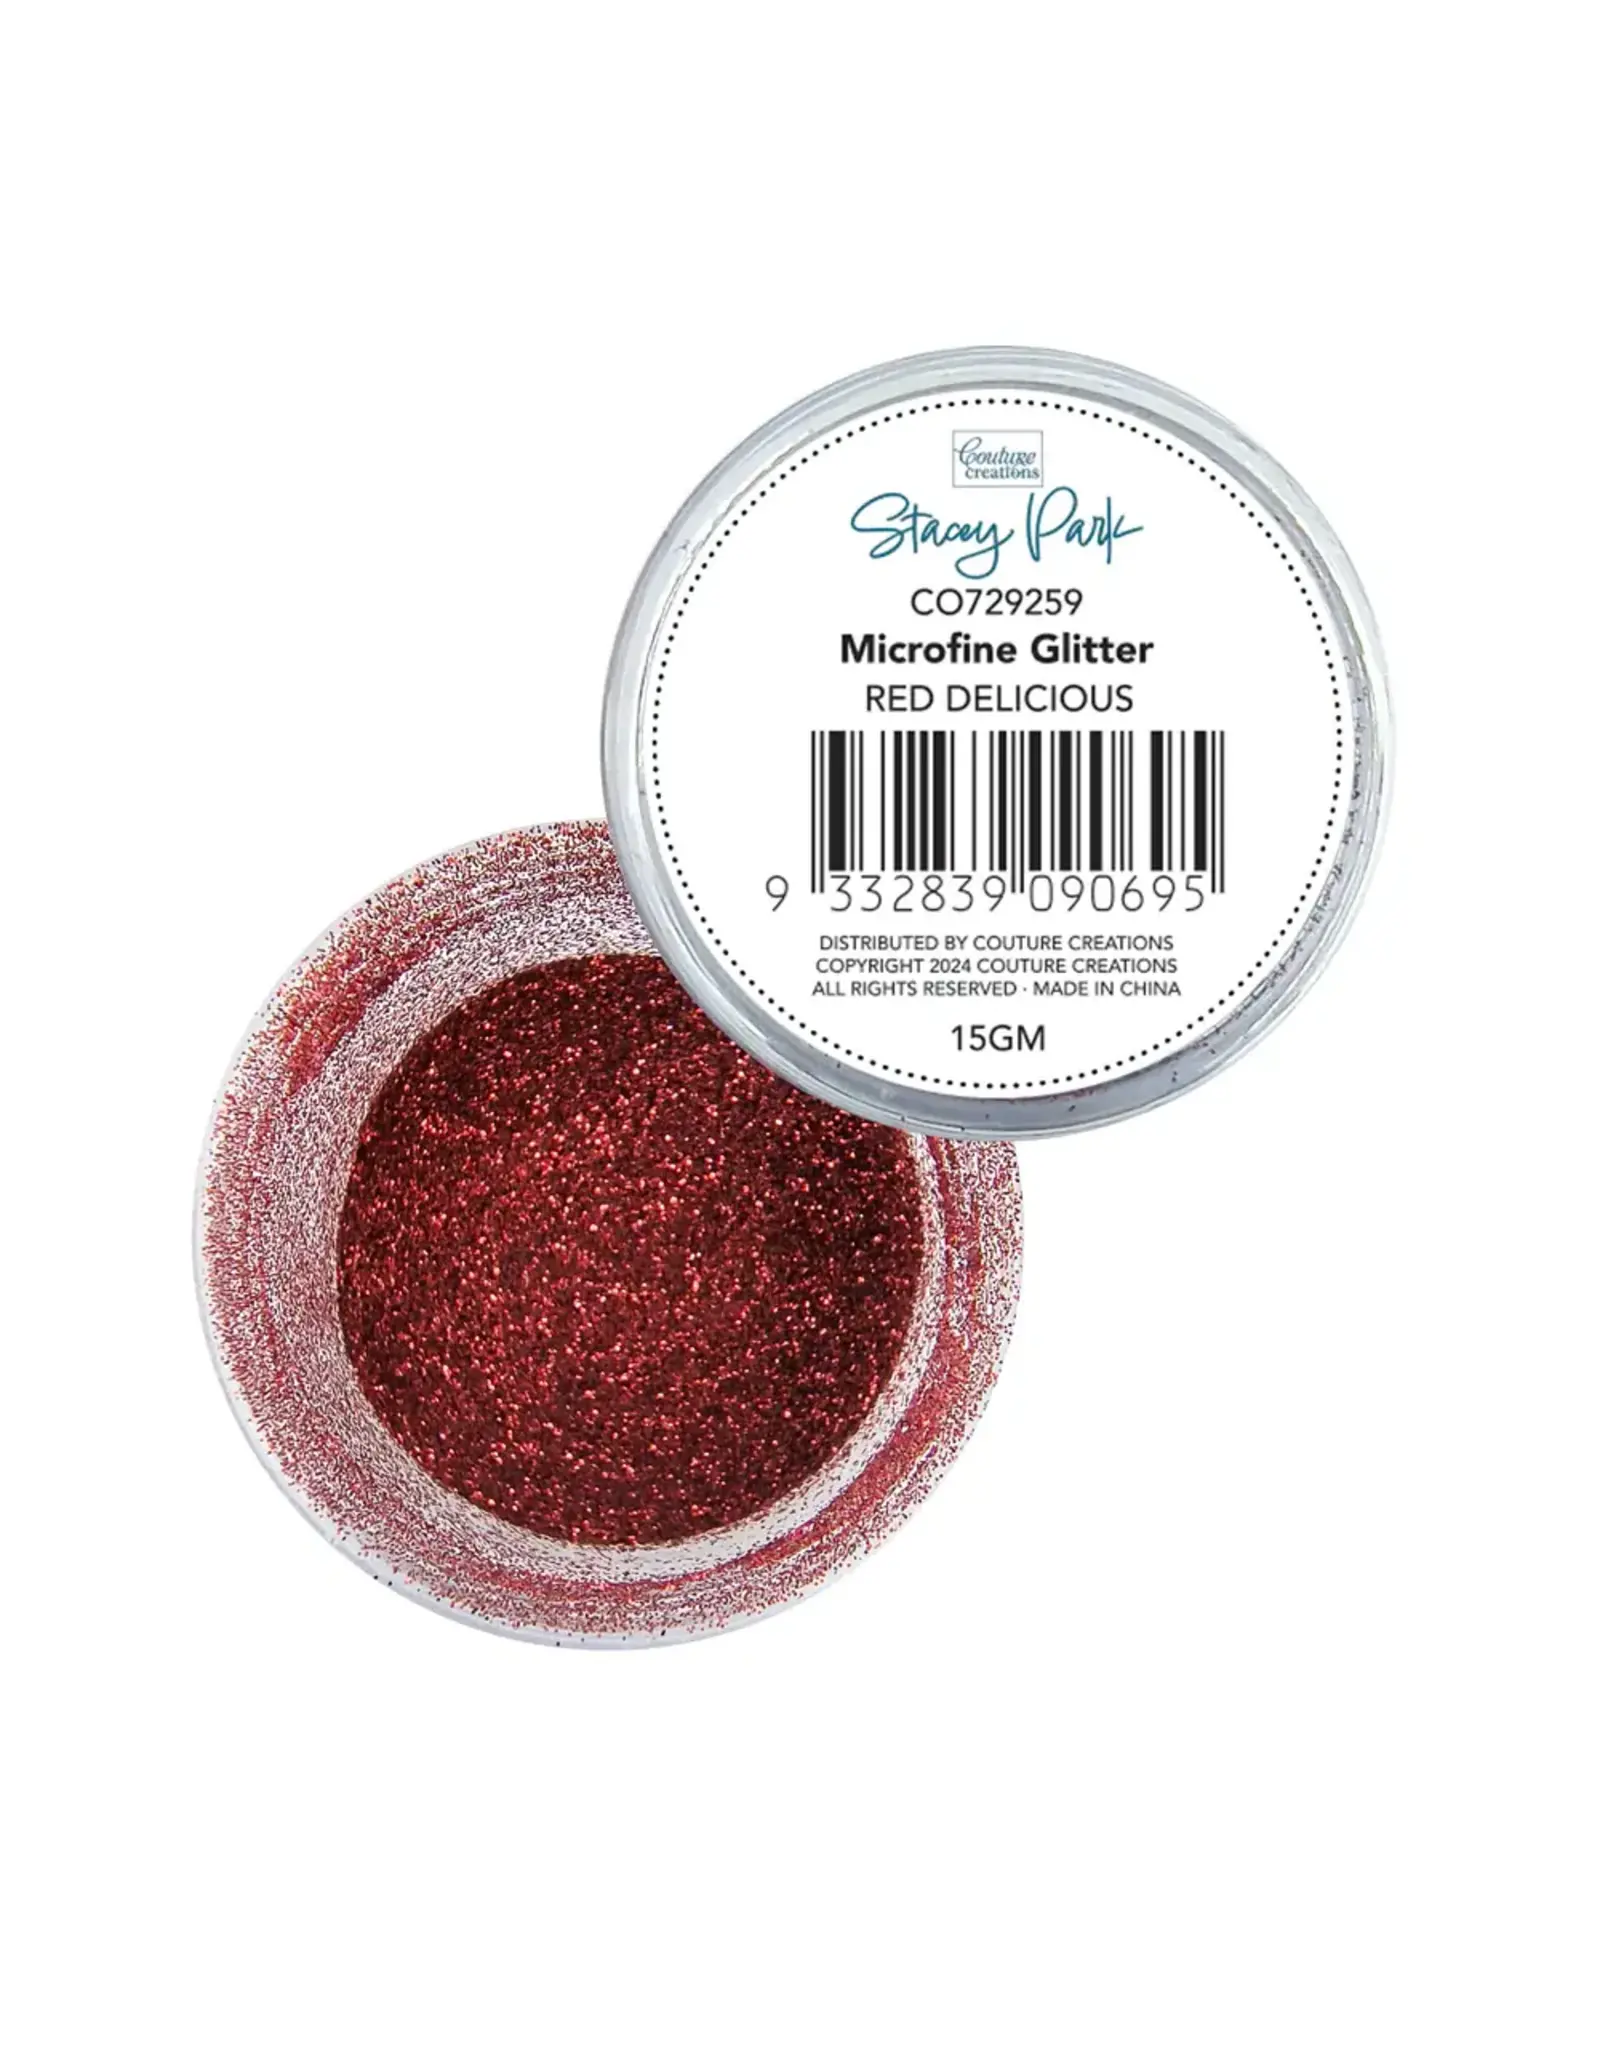 COUTURE CREATIONS COUTURE CREATIONS STACEY PARK RED DELICIOUS MICROFINE GLITTER